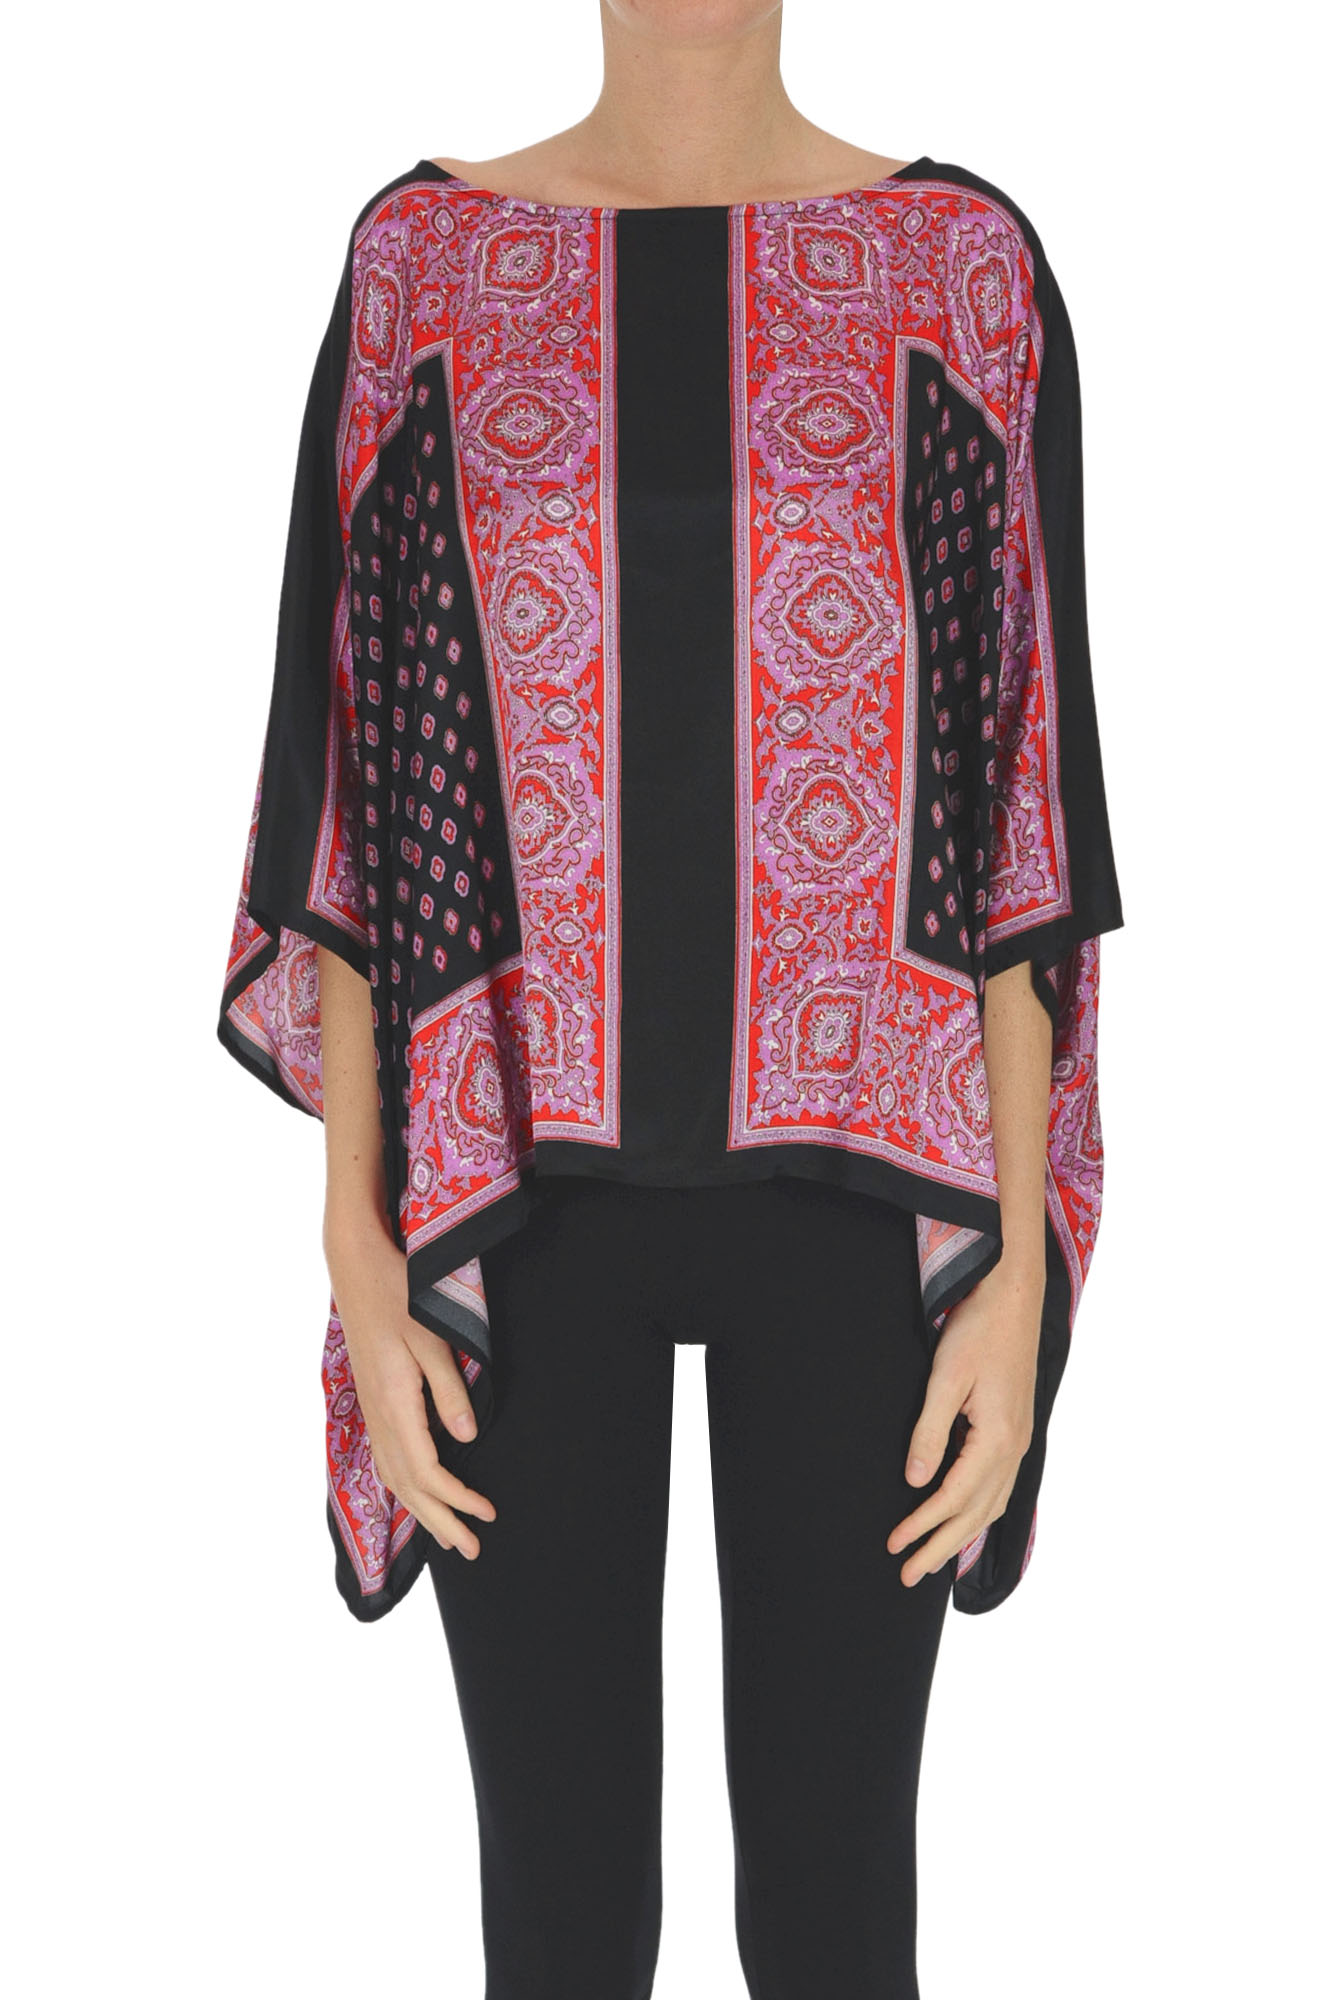 1 ONE PRINTED SATIN BLOUSE